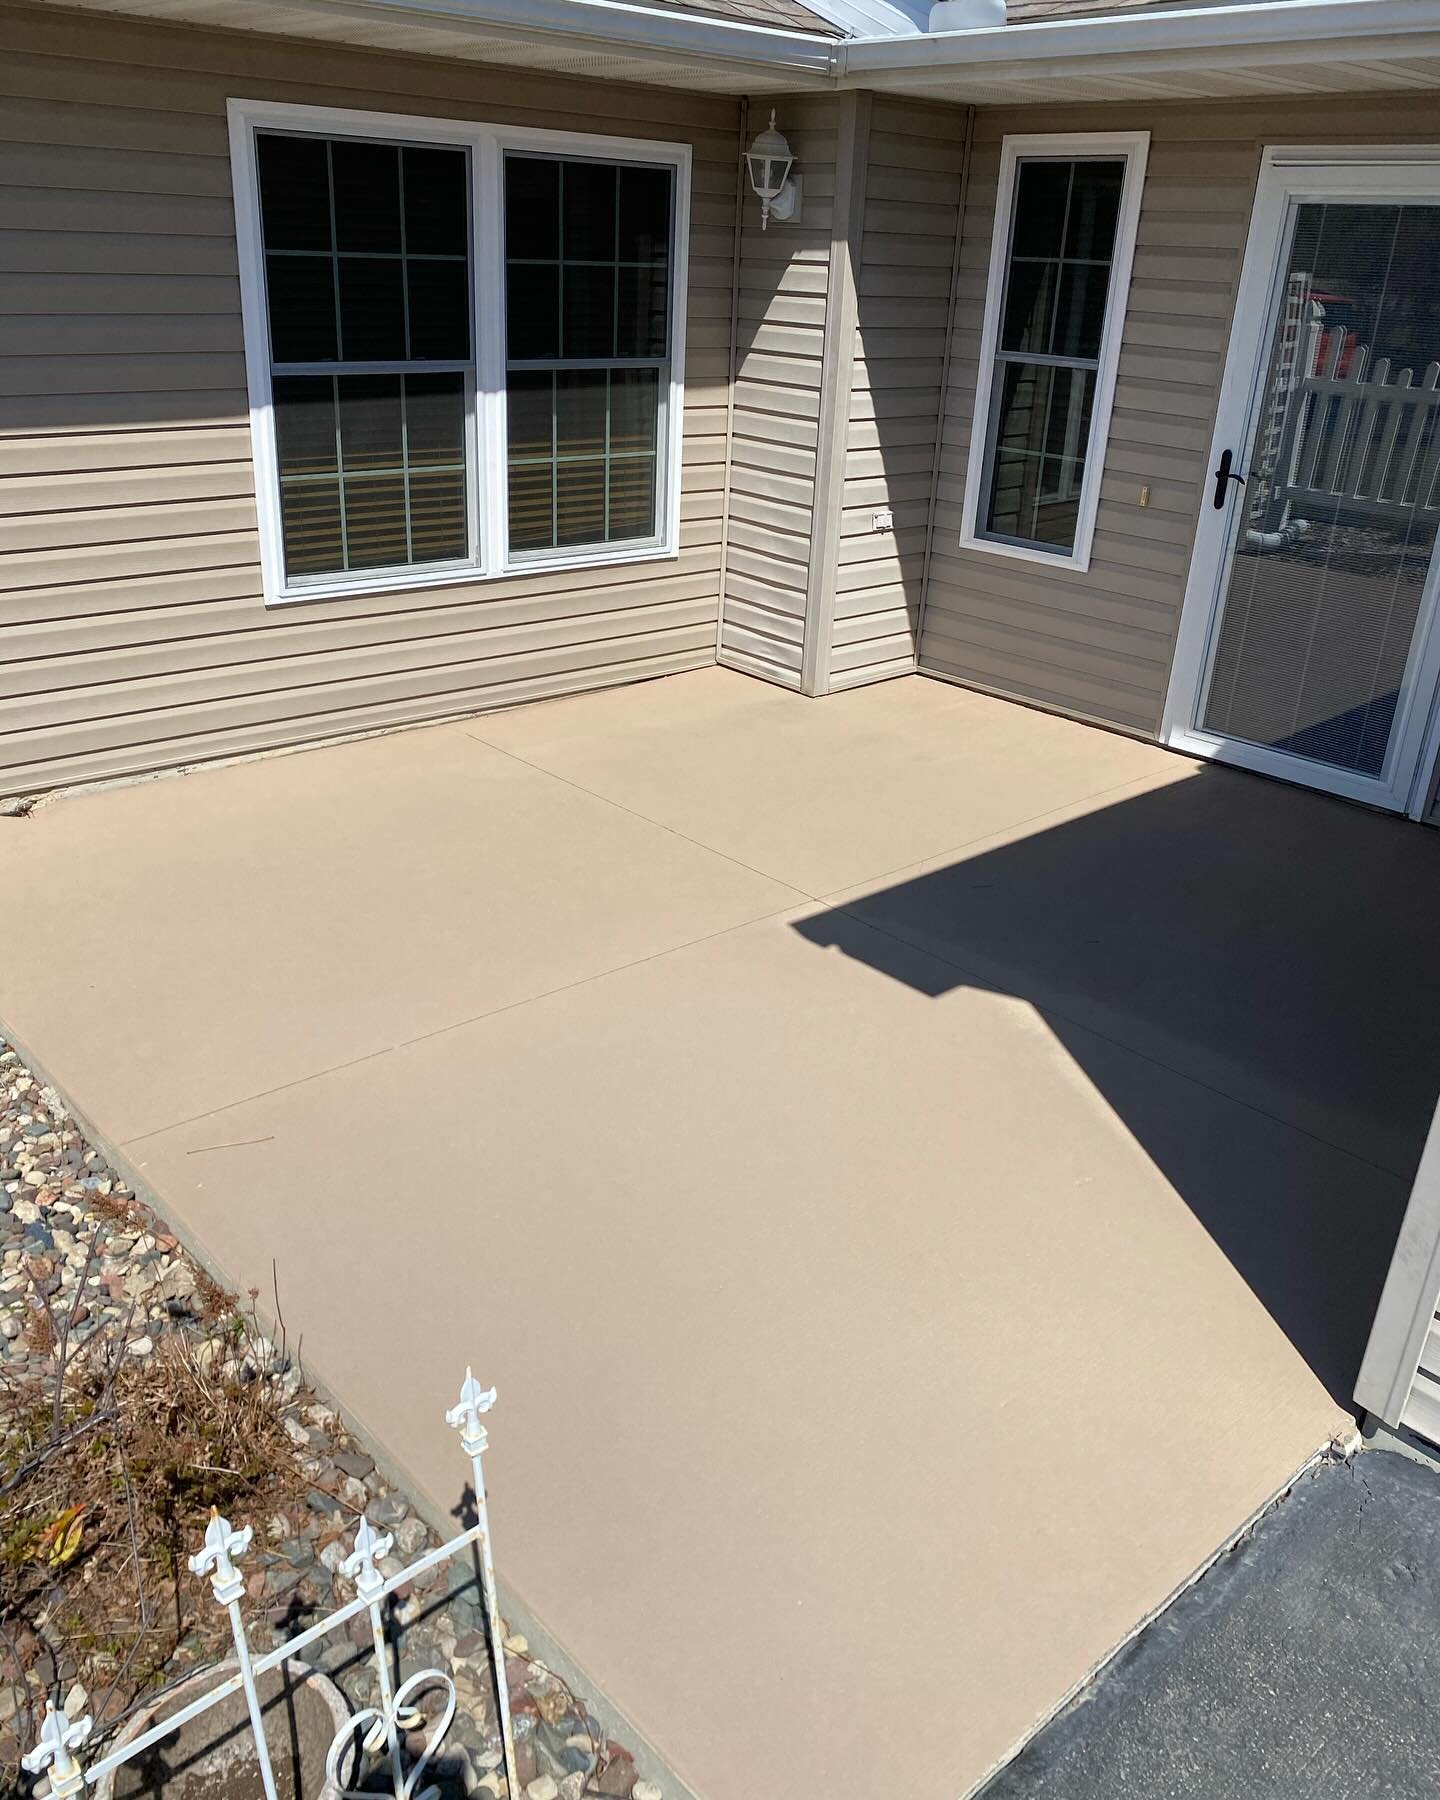 Got an ugly patio? Or maybe a driveway that has multiple sections that don&rsquo;t match? We can address that with a cementitious product that comes in a variety of colors including natural concrete gray. 

@decocrete_supply